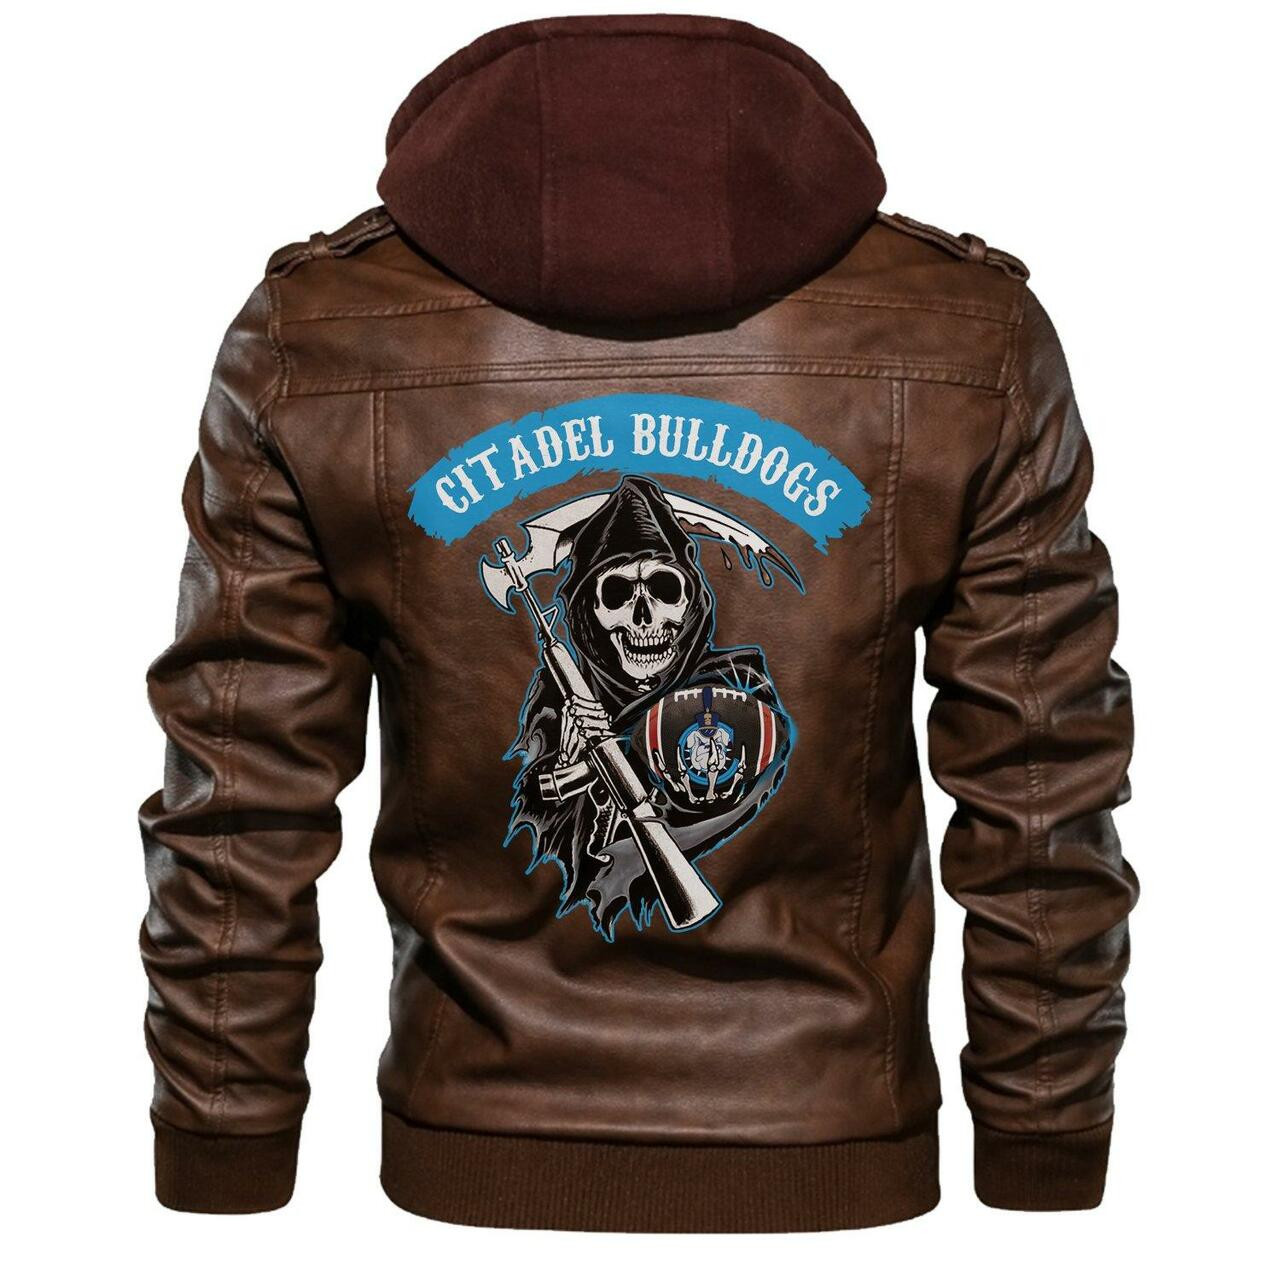 You can find Leather Jacket online at a great price 6